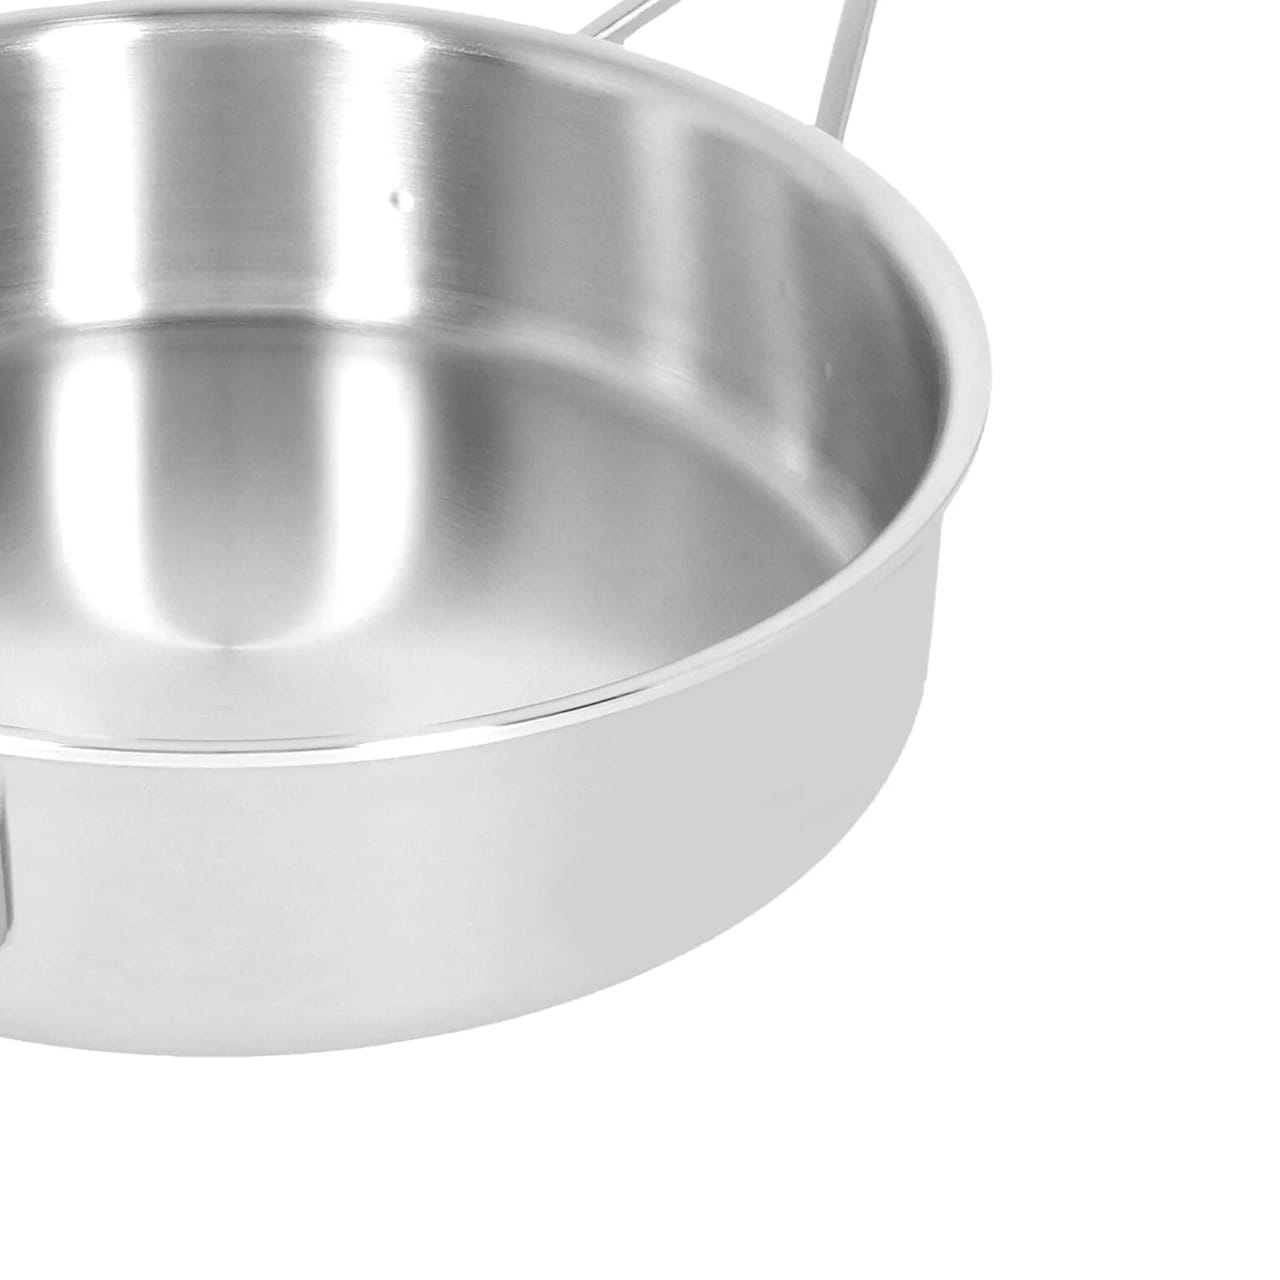 Industry 5 Tractor/Sauté Pan With Lid - 28 cm